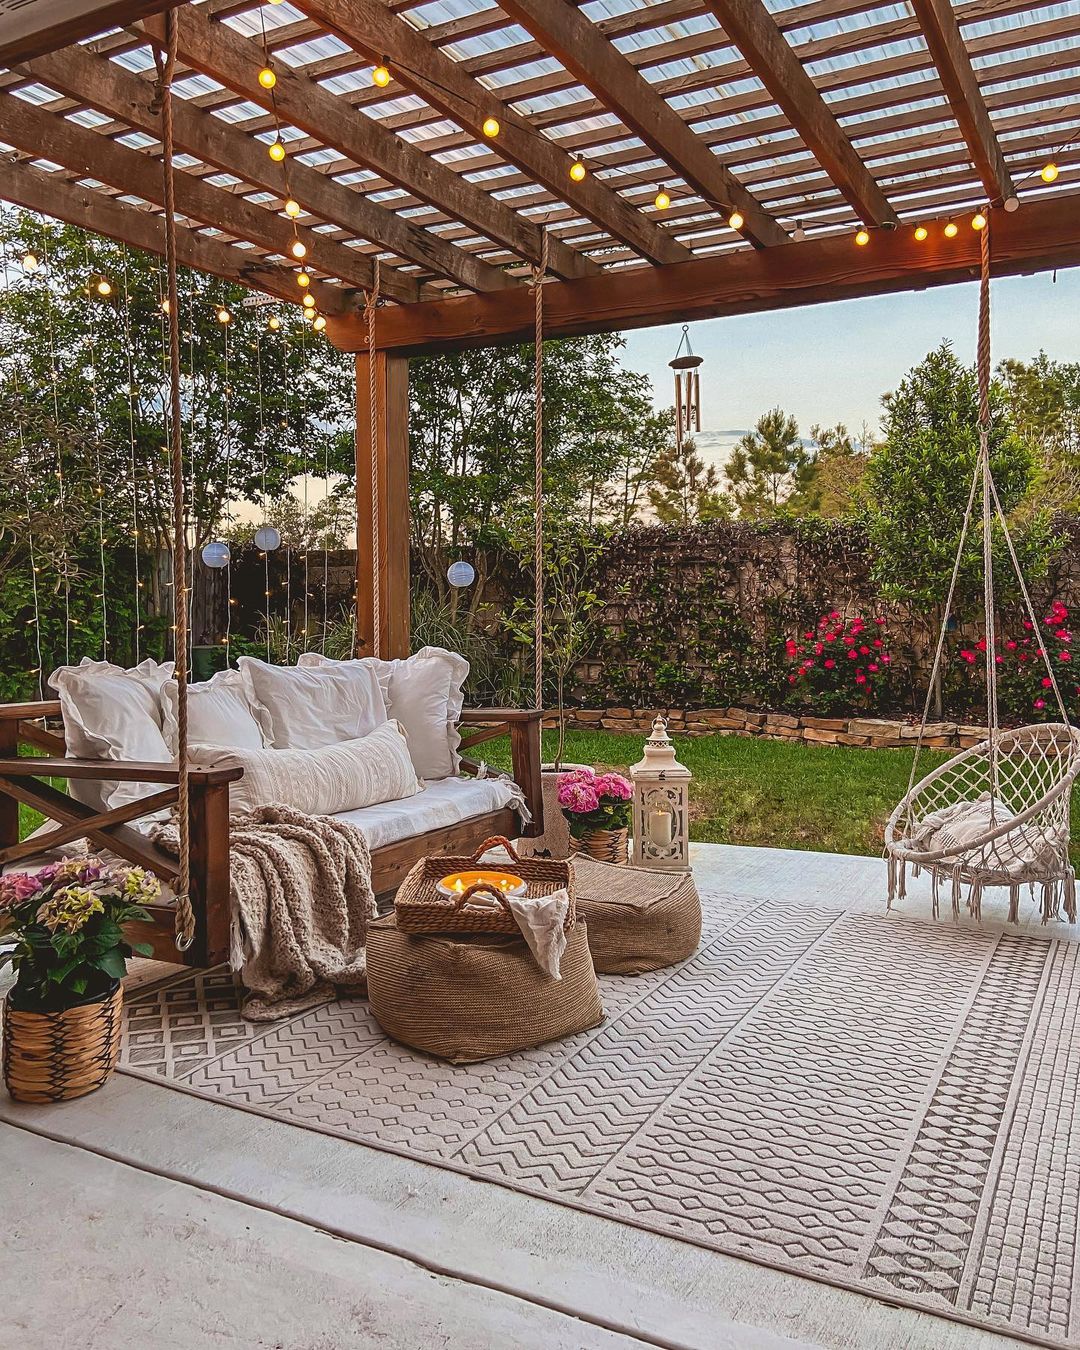 Backyard Pave Patio with a Large Pergola over the Top. Photo by Instagram user @lifebyleanna